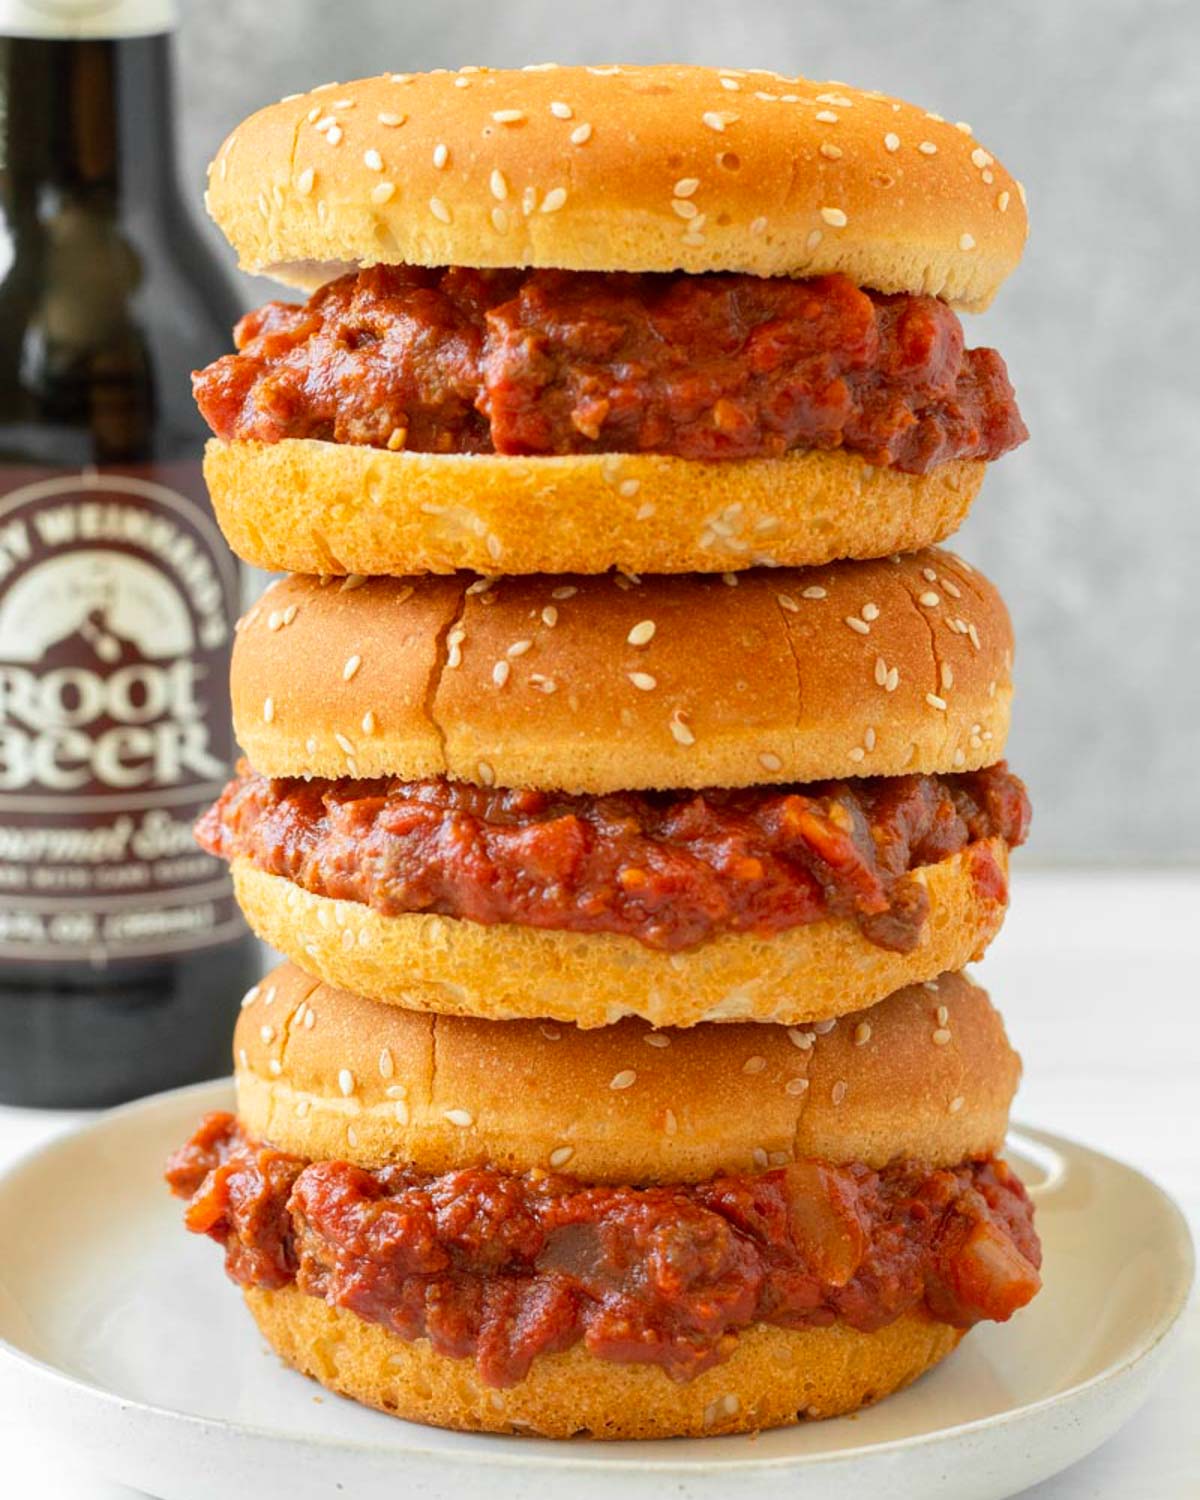 This recipe for homemade sloppy joes is an easy one-pan dinner and the perfect healthy comfort food. Made with ground beef and a rich, flavorful tomato sauce, our healthy sloppy joes are a kid-friendly meal that the adults will love too.